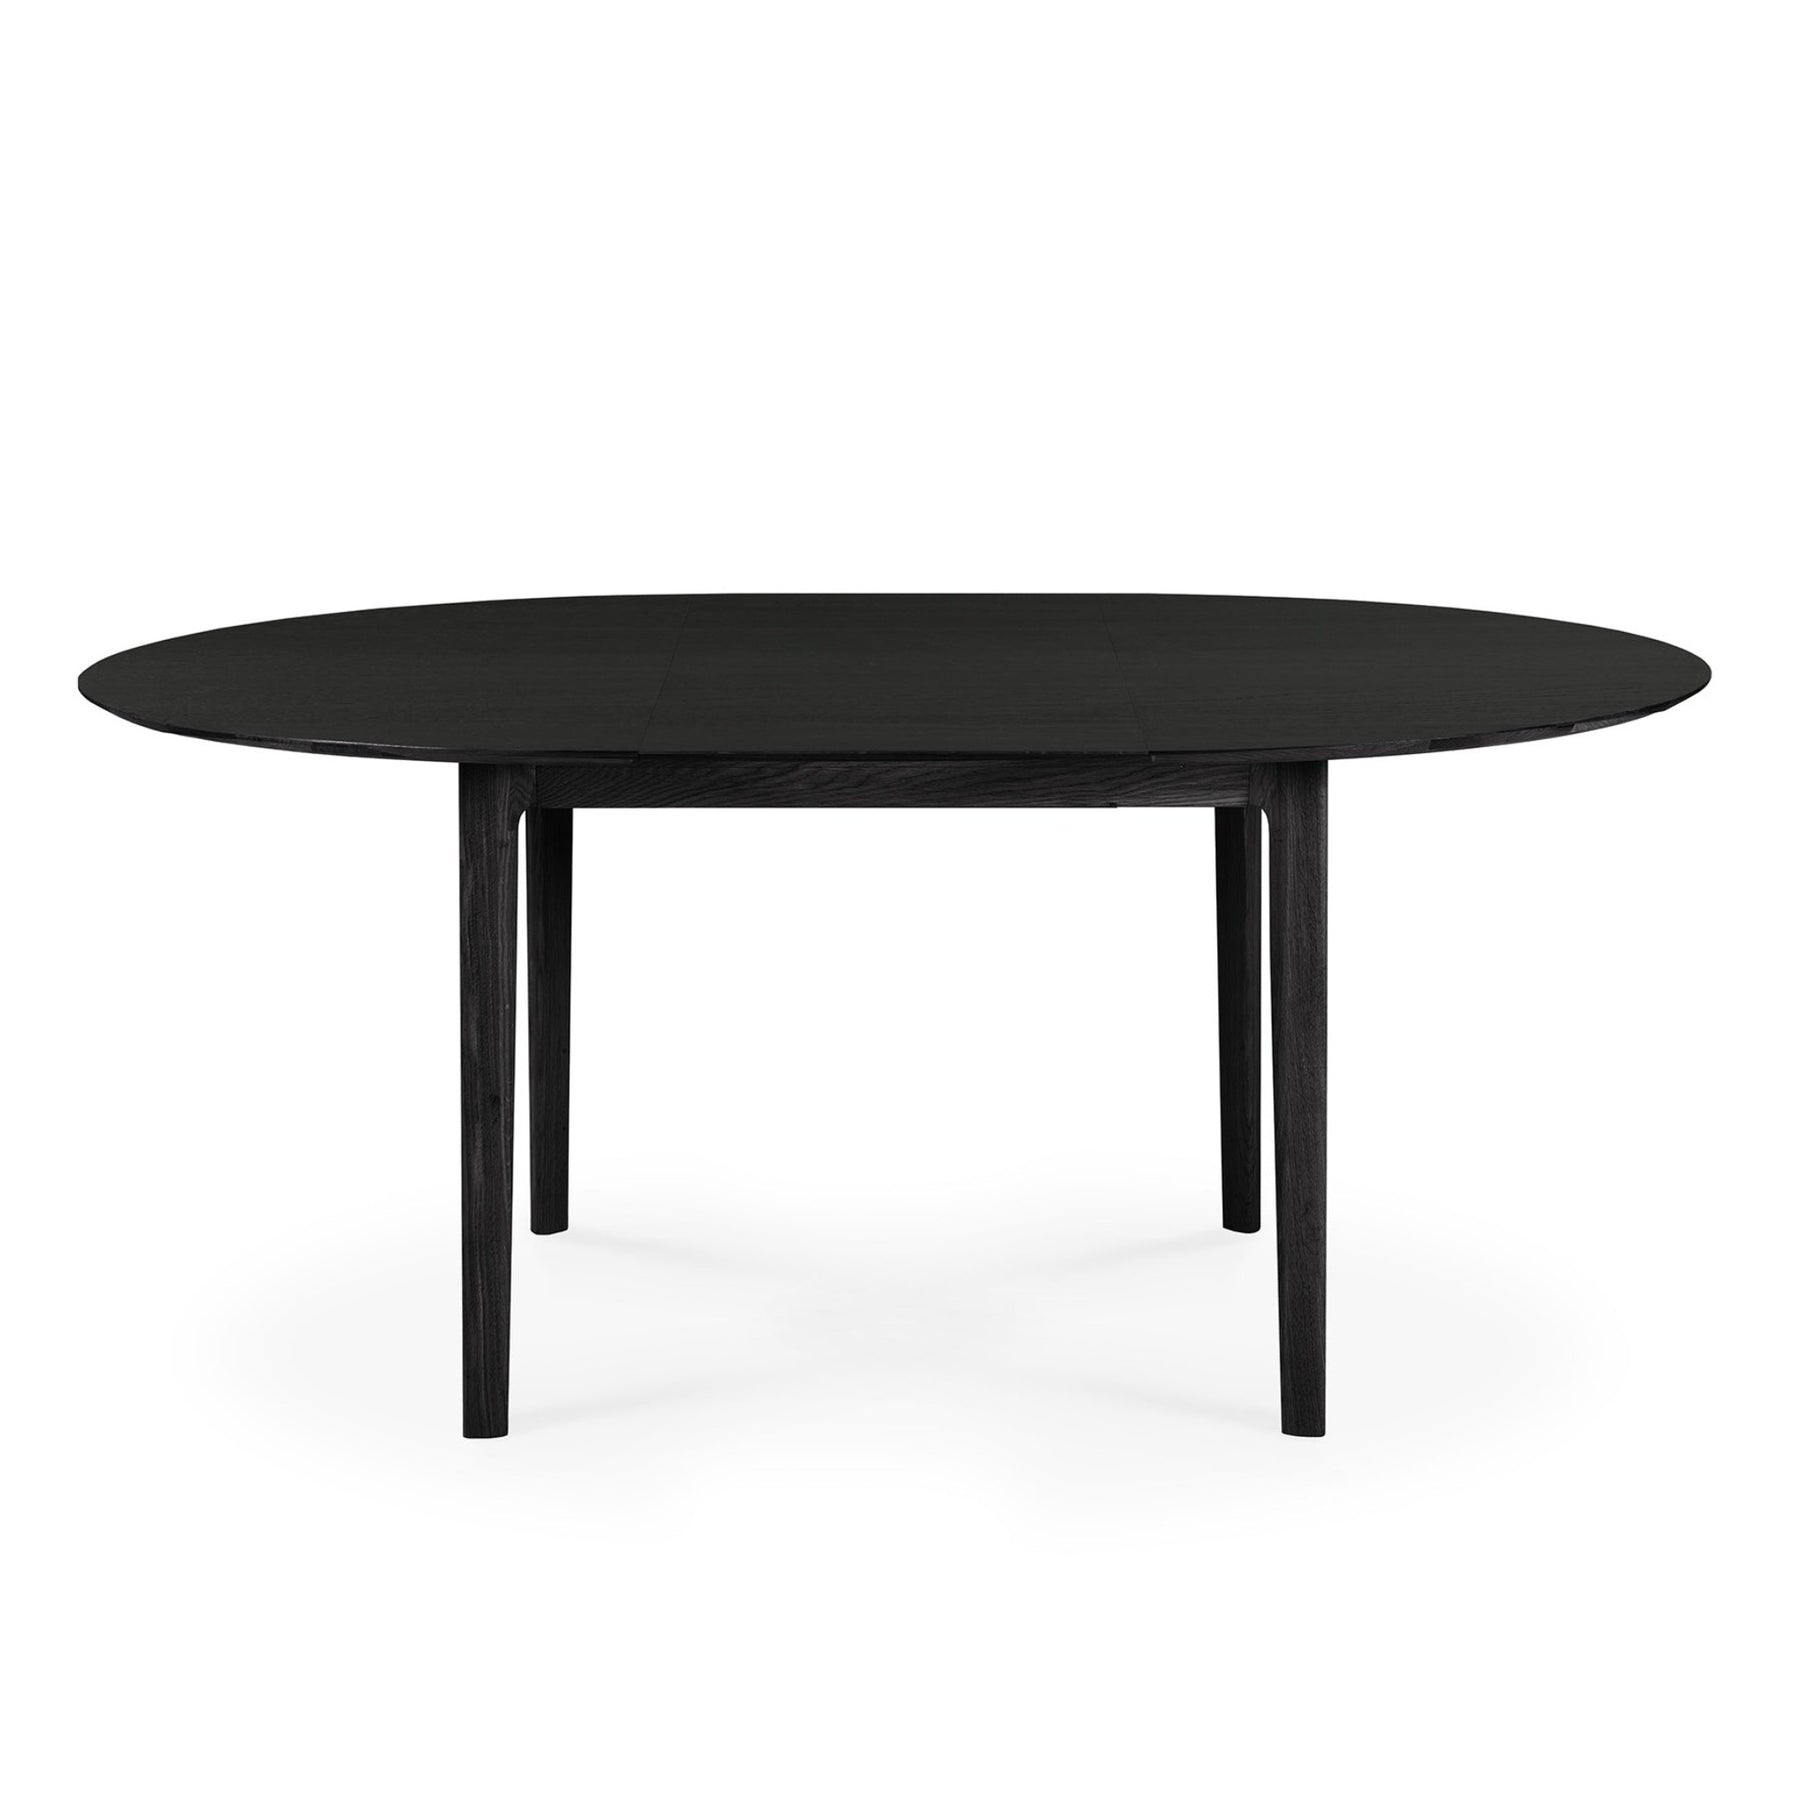 Ethnicraft Black Oak Bok Round Extendable Dining Table 51528 Fully Extended into Oval